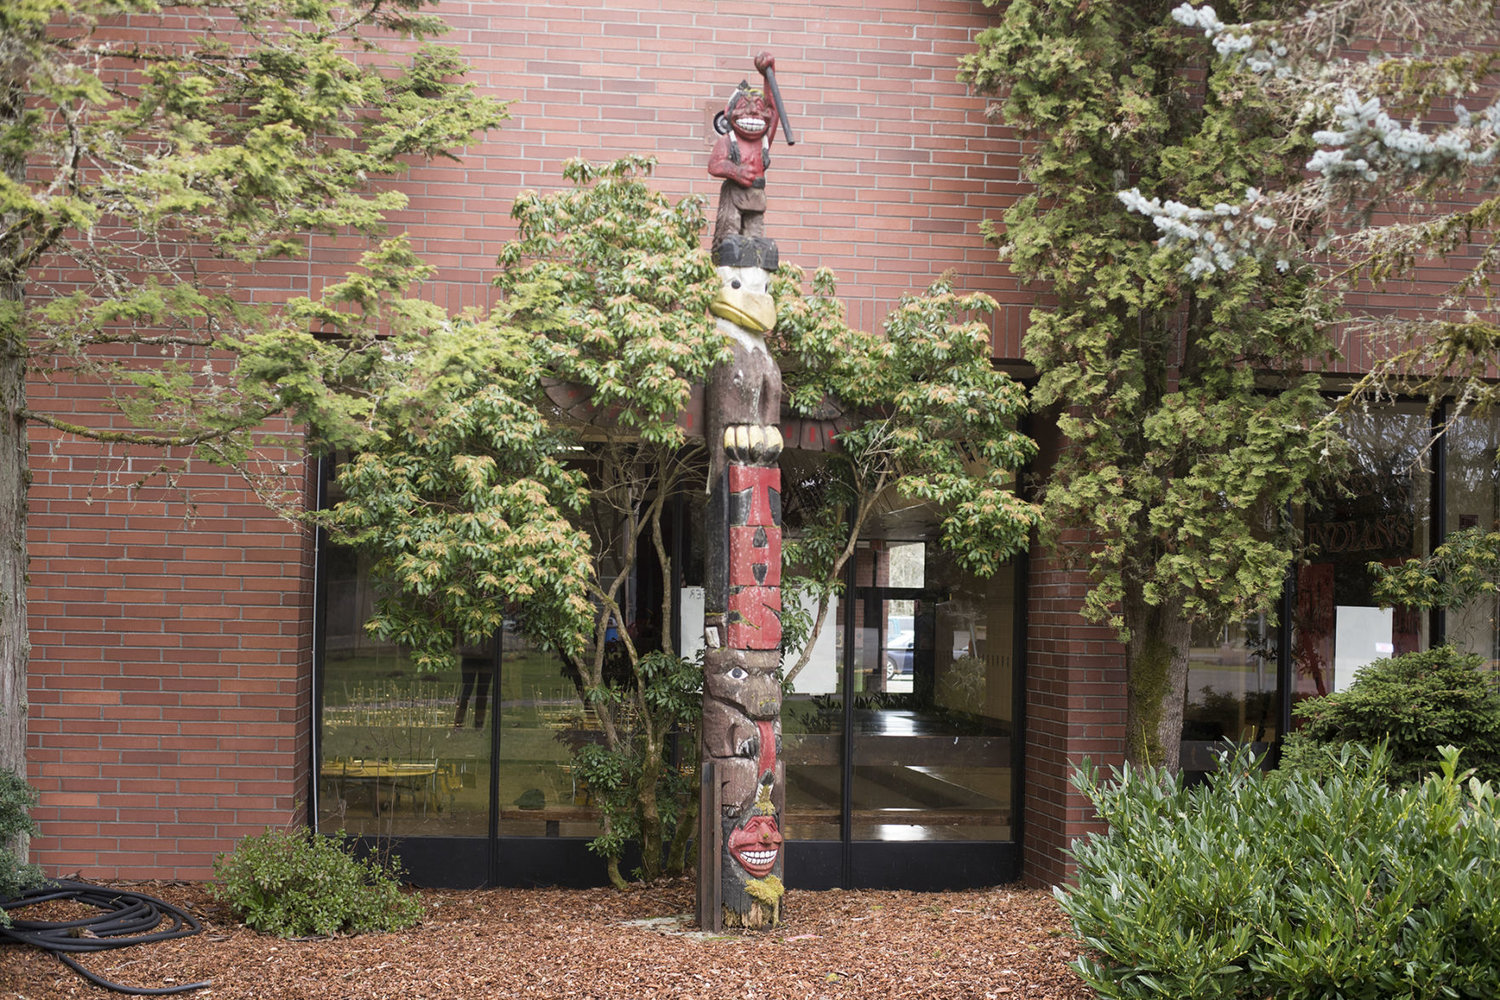 FILE PHOTO — A totem pole was in front of Toledo High School in this 2019 Chronicle file photo.